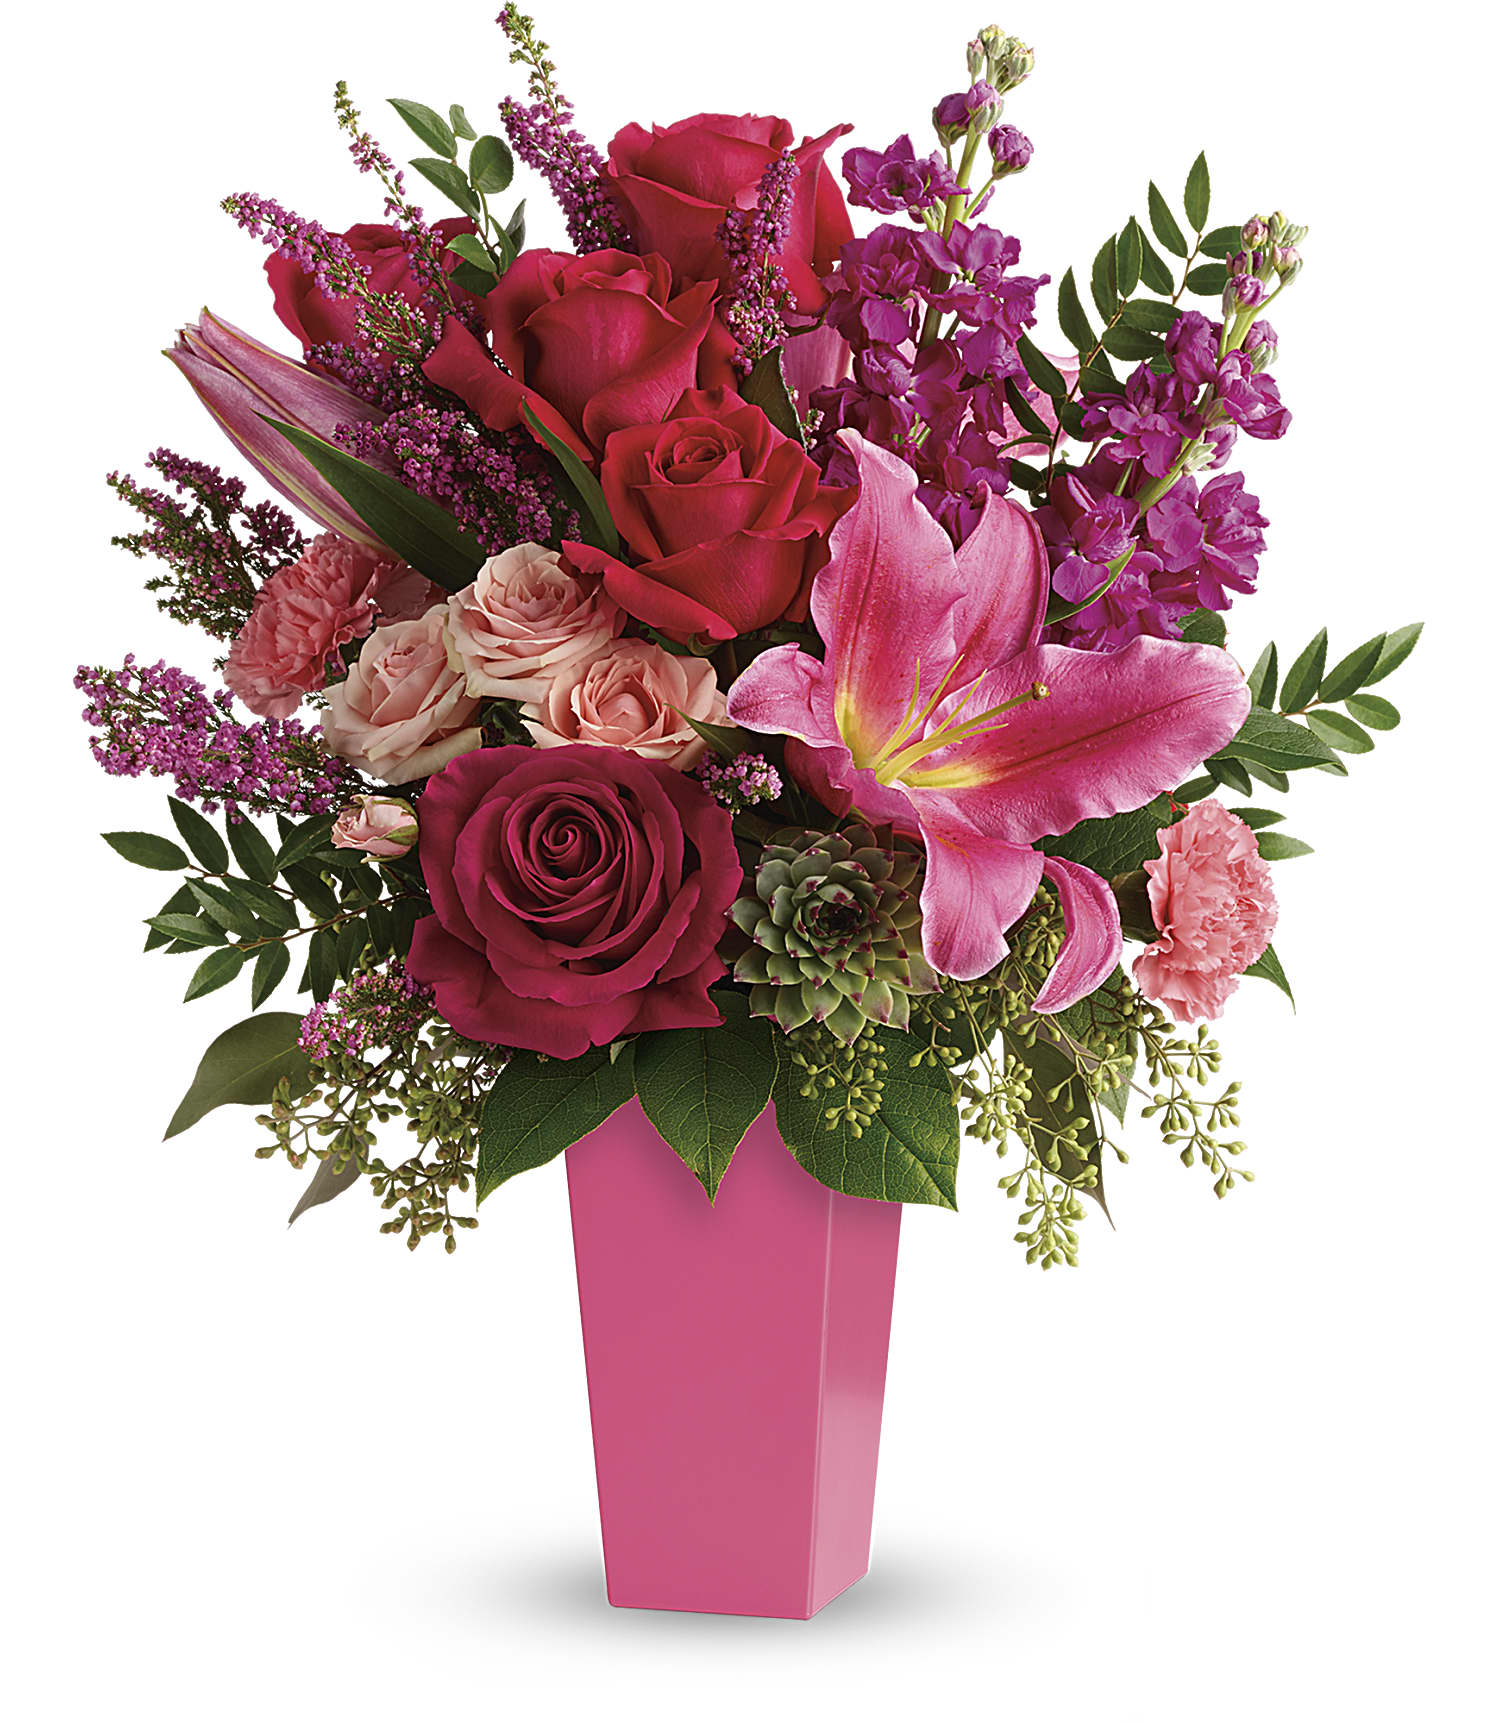 Forever Fuchsia Bouquet - Pretty in pink! A surprise they'll remember forever, this fantasy of fuchsia lilies, roses and carnations is artistically arranged in a sleek contemporary vase.  This stunning bouquet features pink oriental lilies, hot pink roses, pink carnations, fuchsia stock, light pink spray roses, pink heather, lemon leaf, huckleberry, seeded eucalyptus, and a small green potted echeveria succulent. Delivered in a raspberry tapered vase.  Approximately: 16 1/2&quot; W x 19 1/2&quot; H  Orientation: All-Around